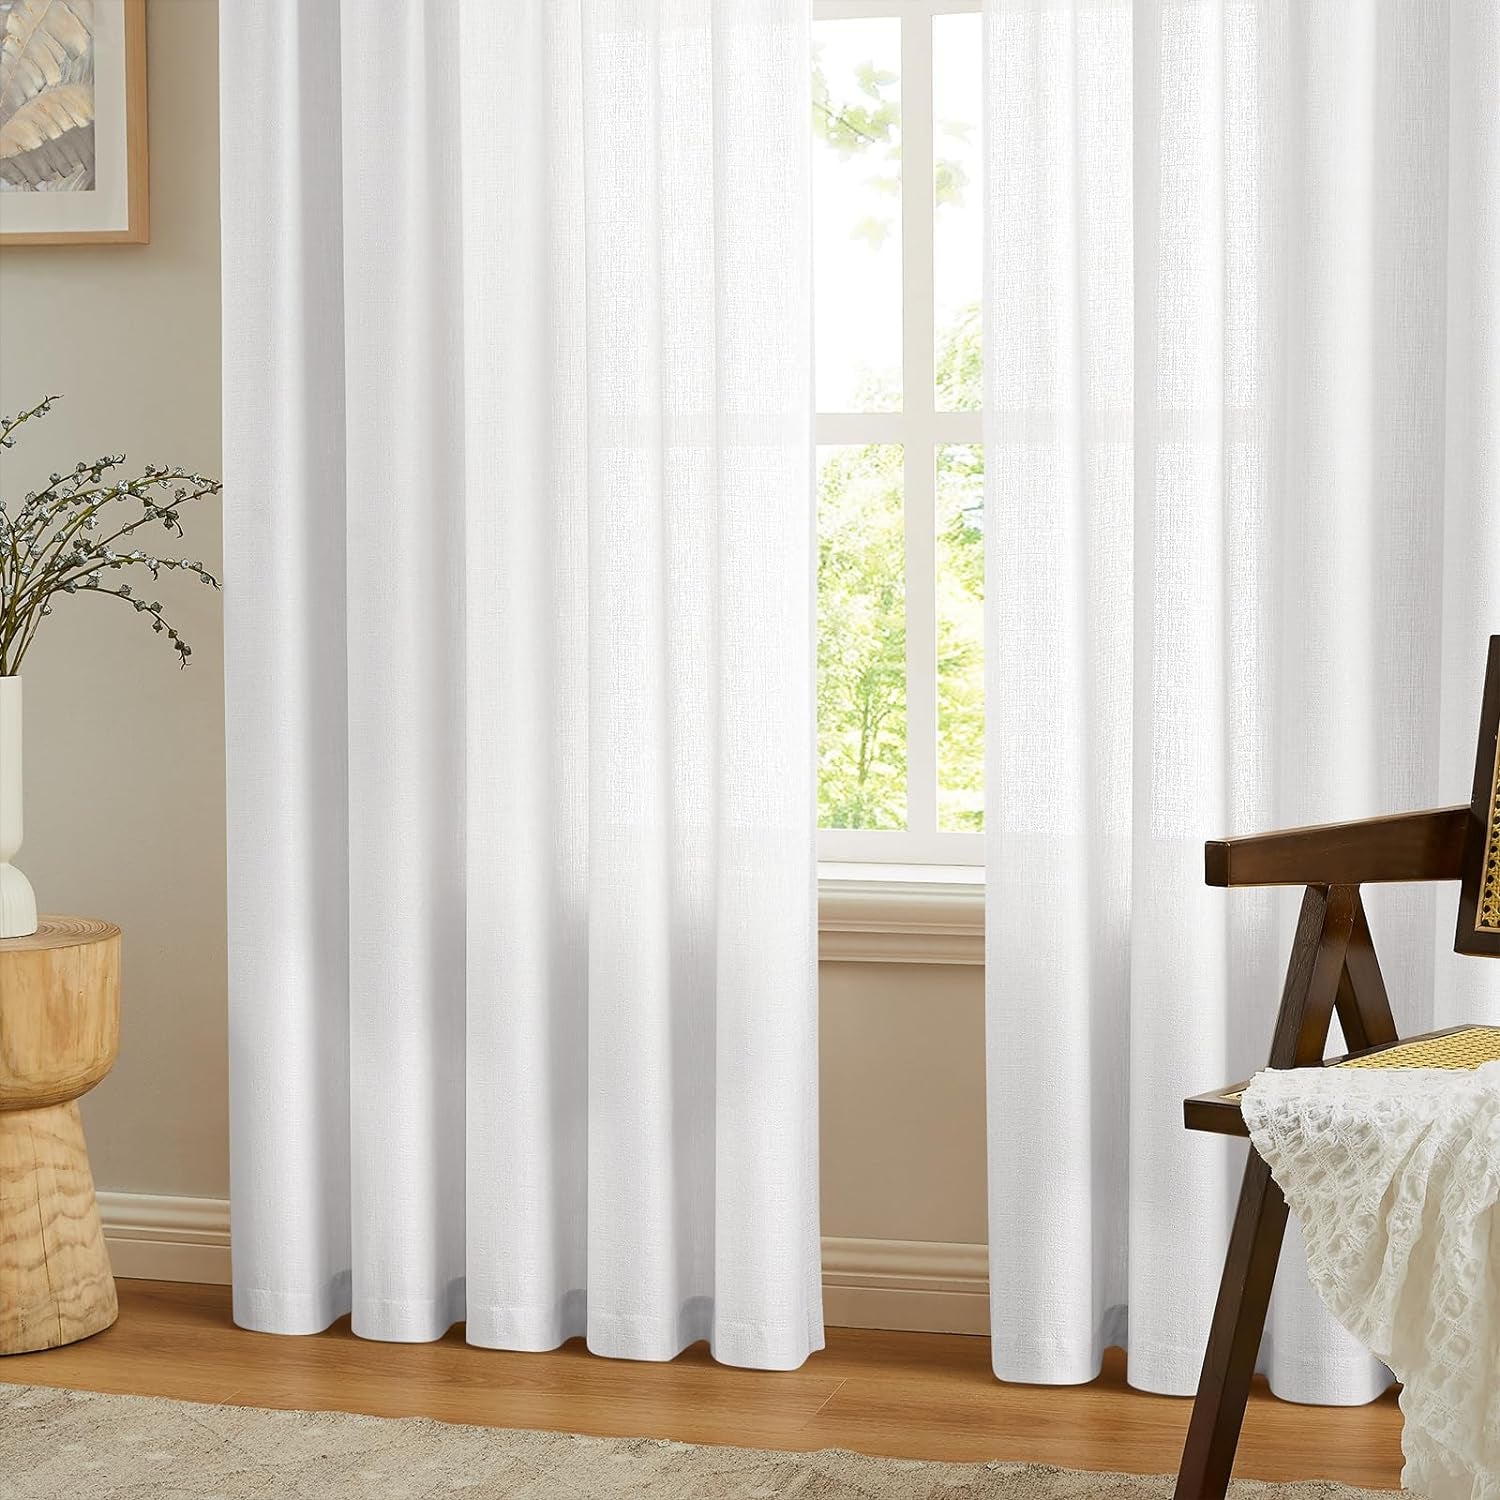 Anpark White Semi Sheer Curtains Linen Rod Pocket Curtains Tiebacks Included Semi Sheers, Privacy & Serenity for Bedroom, Soft Light for Relaxation - 52" W X 84" L, 2 Panels  Anpark   